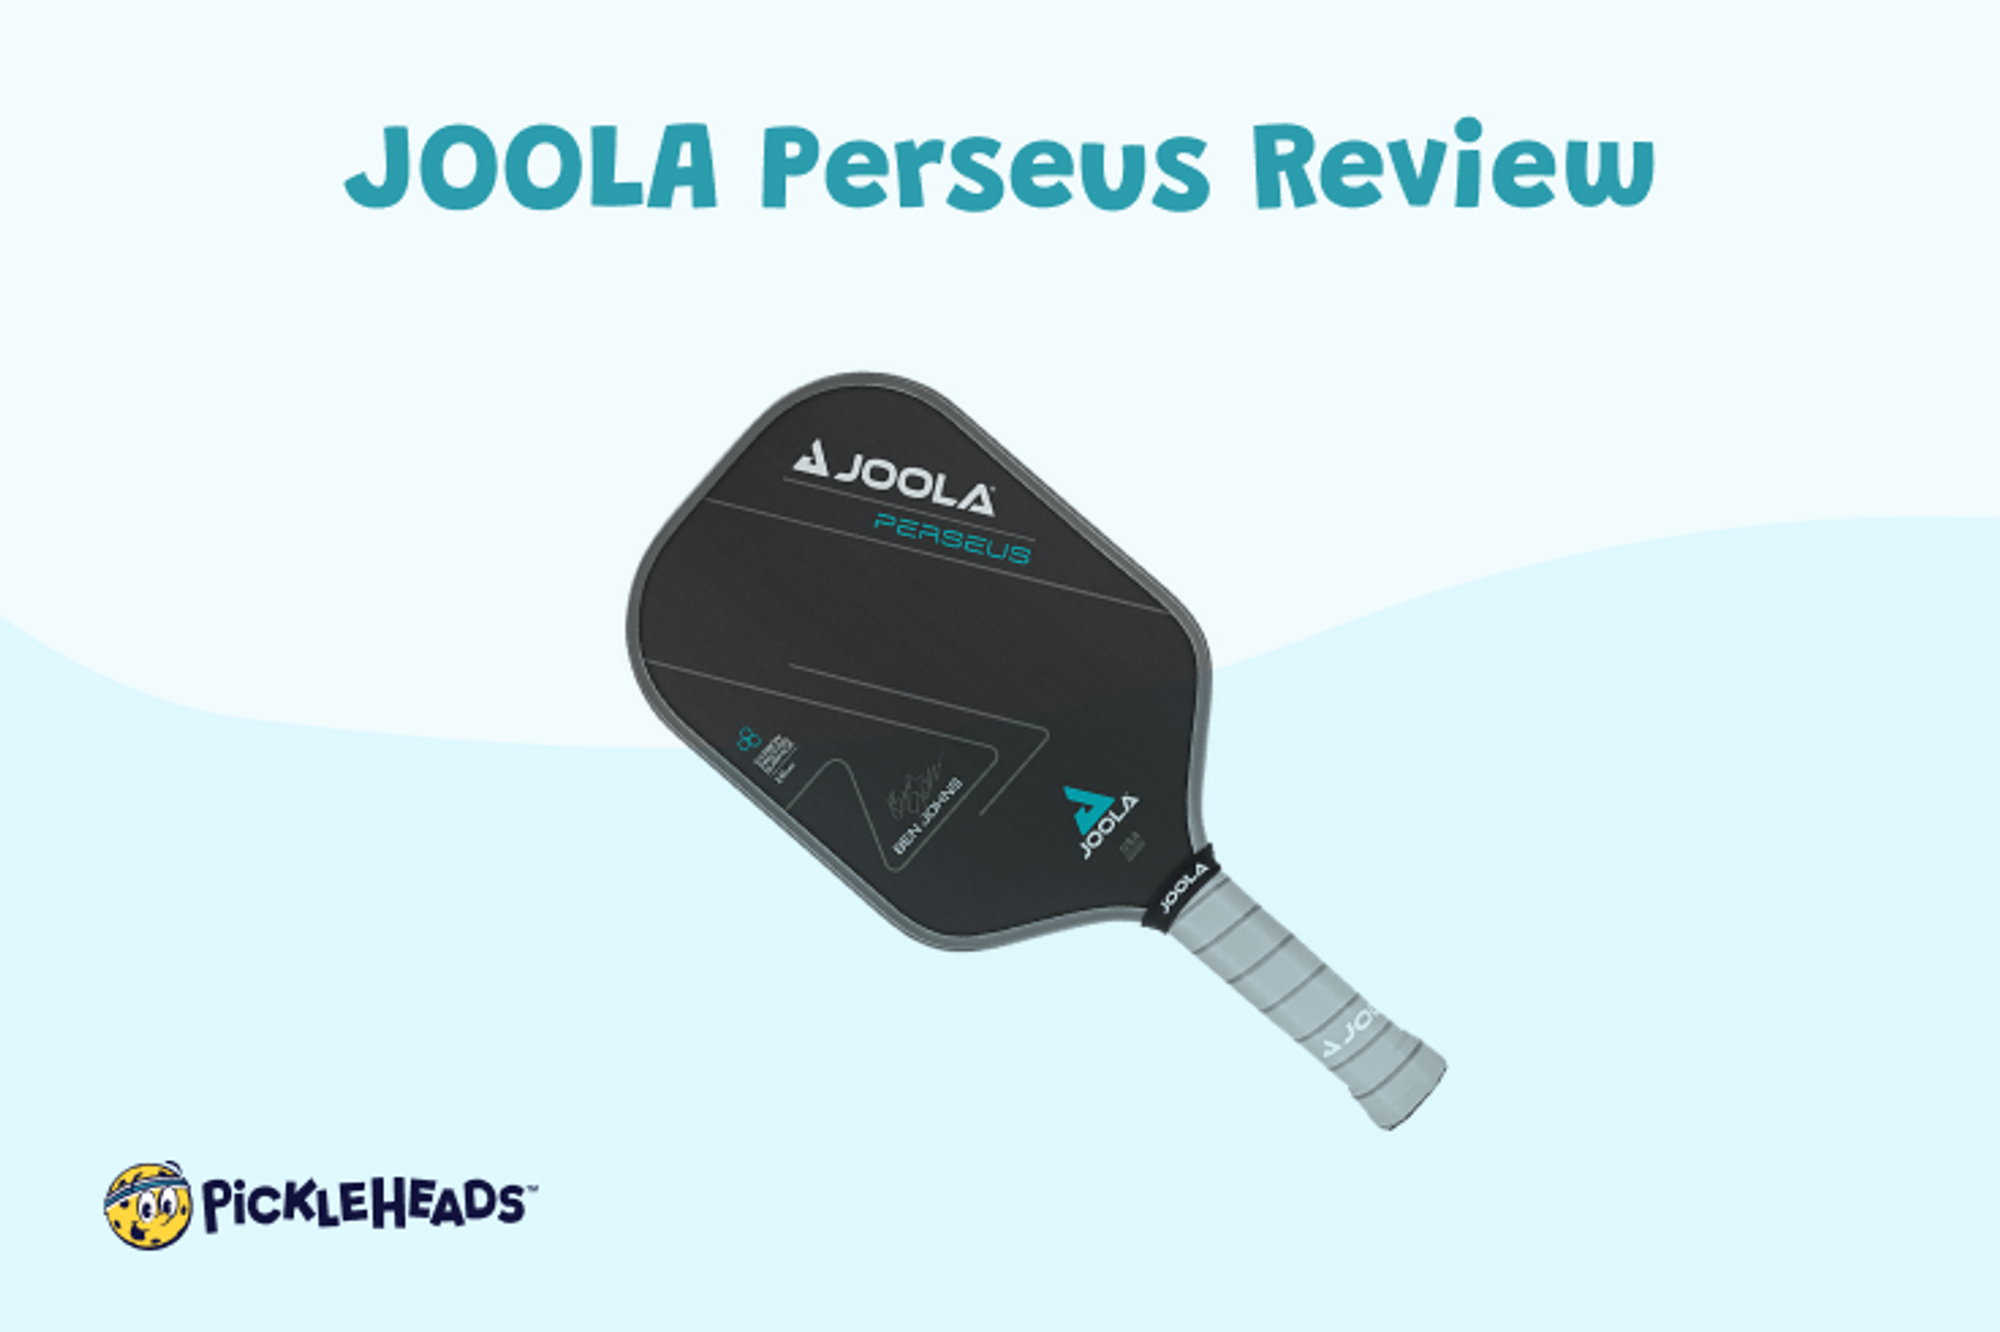 The JOOLA Perseus Review pickleball paddle on a blue background